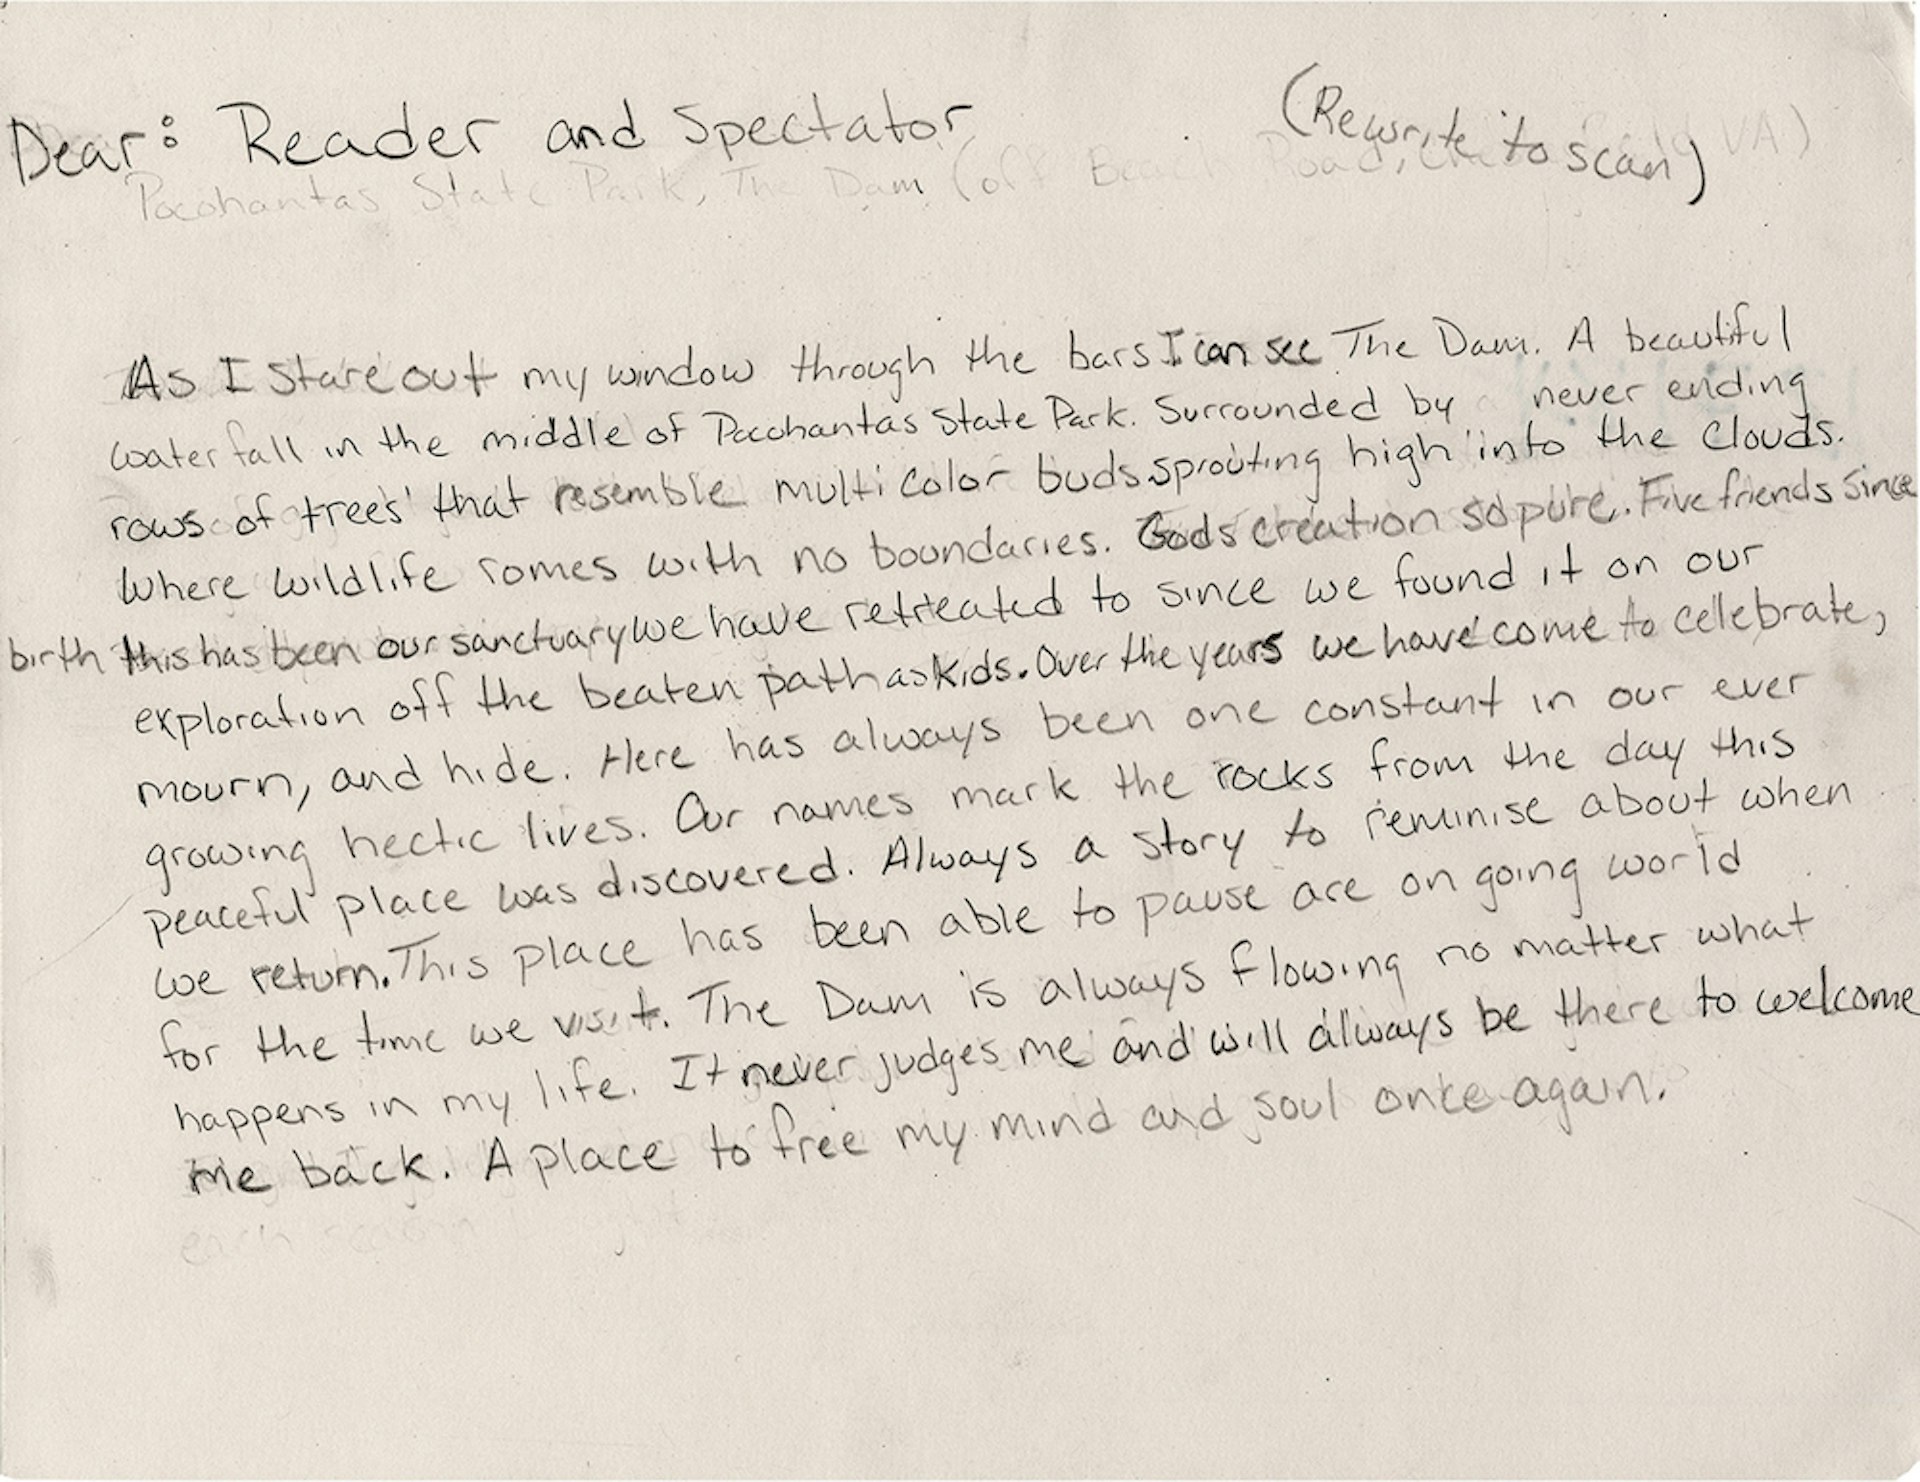 A prisoner’s text describing a dam in Pocahontas State Park. Artist Mark Stradnquist then made a photograph of the dam and gifted it to the prisoner. When exhibited, Strandquist partners with local prison reform groups to program events and education about mass incarceration, community and solutions. From the series ‘Windows From Prison’ by Mark Strandquist.